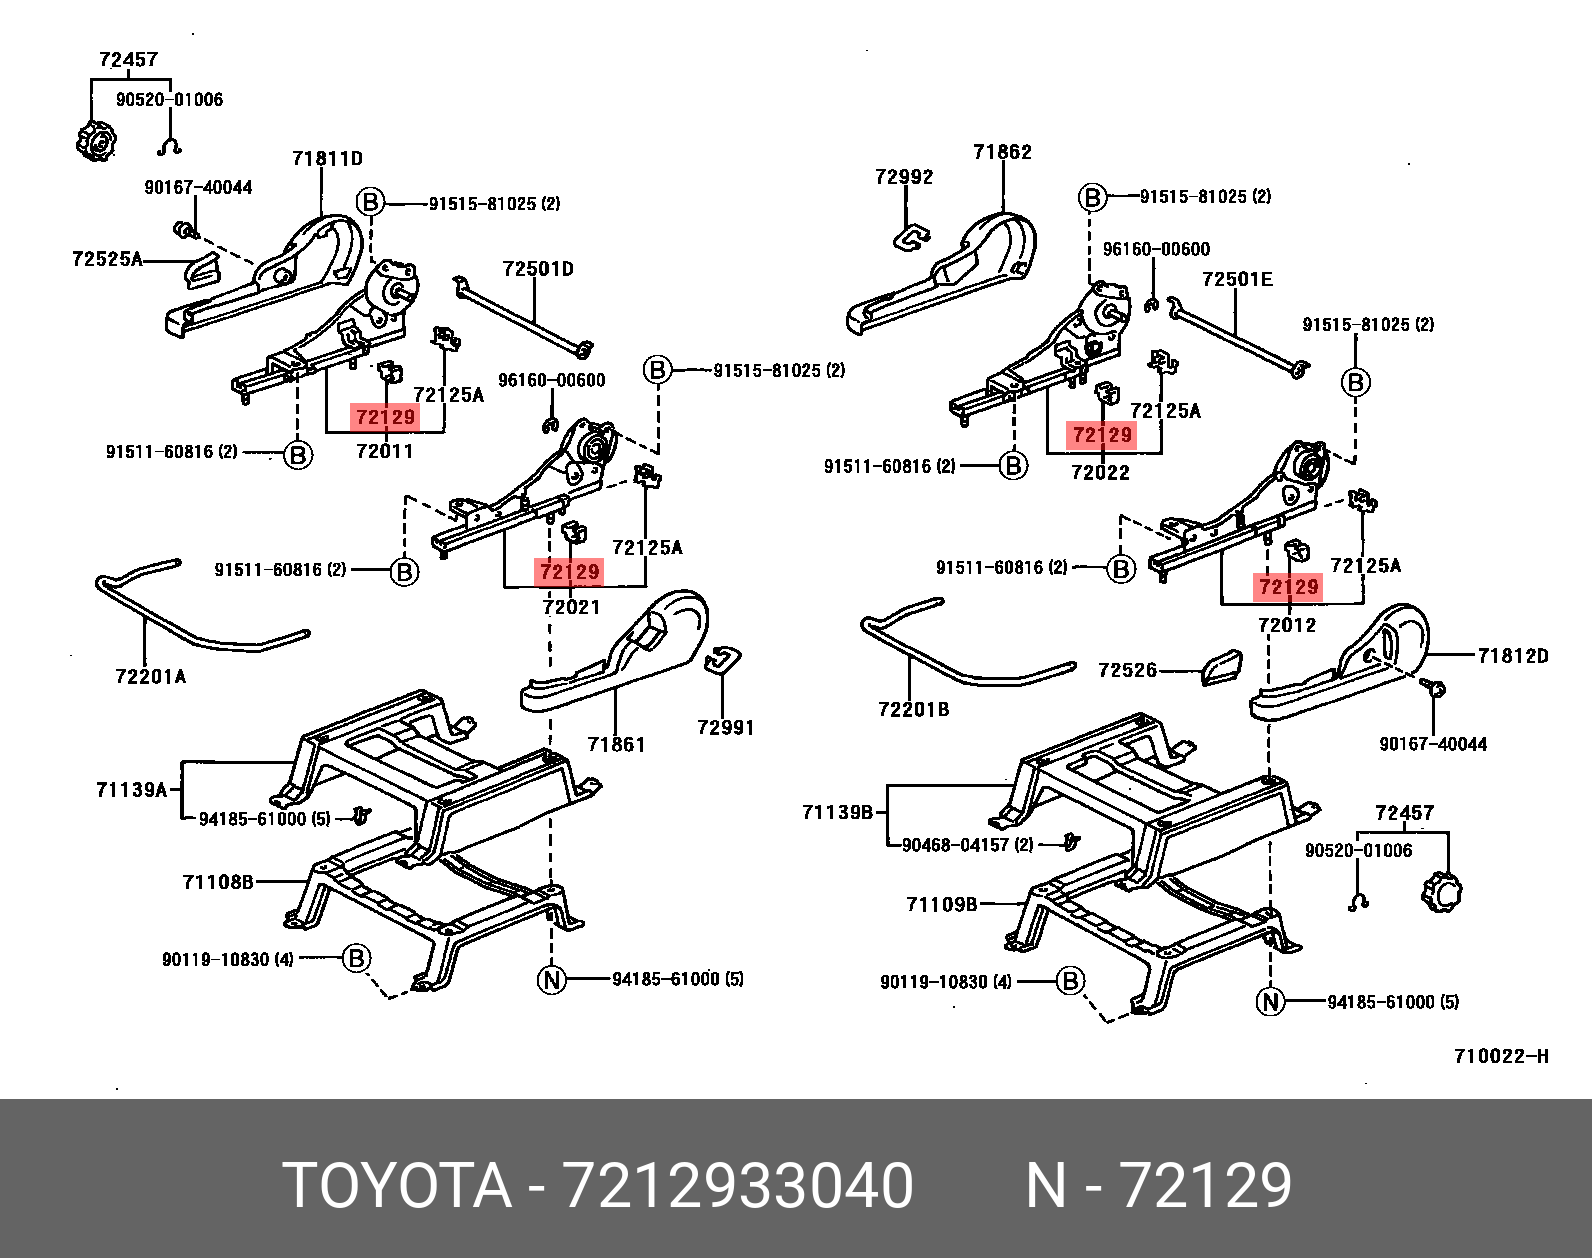 CAMRY 200109 - 200601, PROTECTOR, SEAT TRACK LOWER RAIL, NO.2